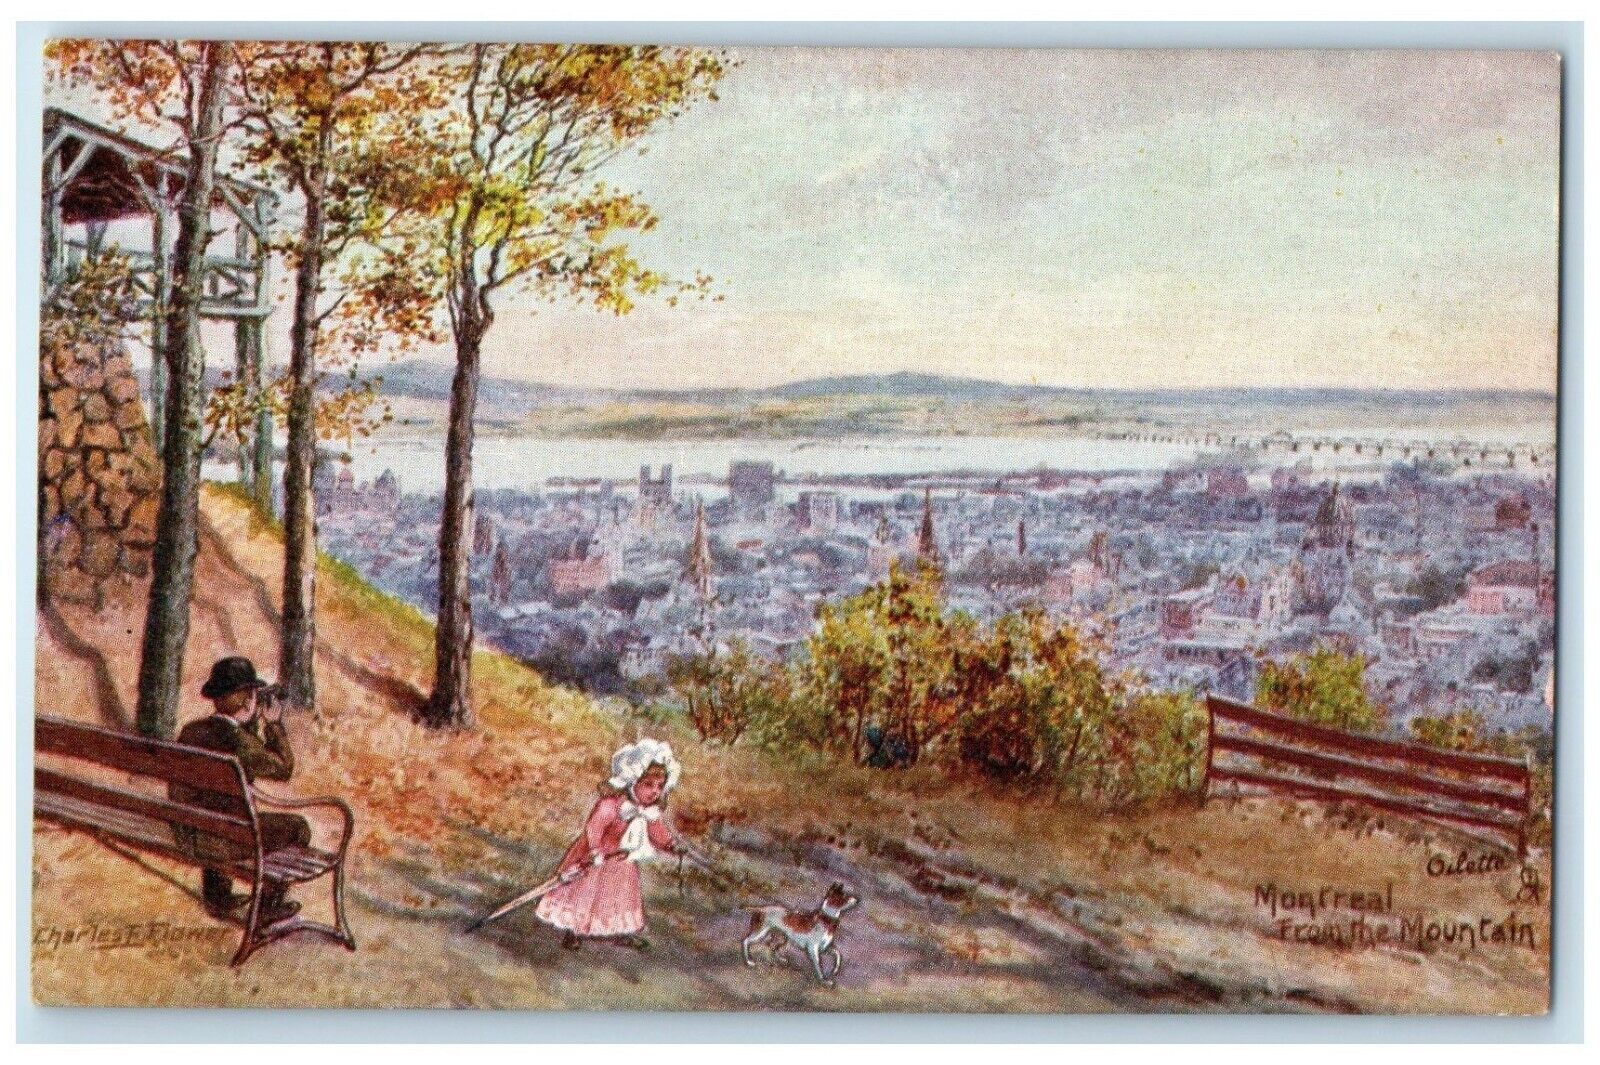 Montreal From The Mountain Camera Girl Dog Reward Card Tuck's Oilette Postcard